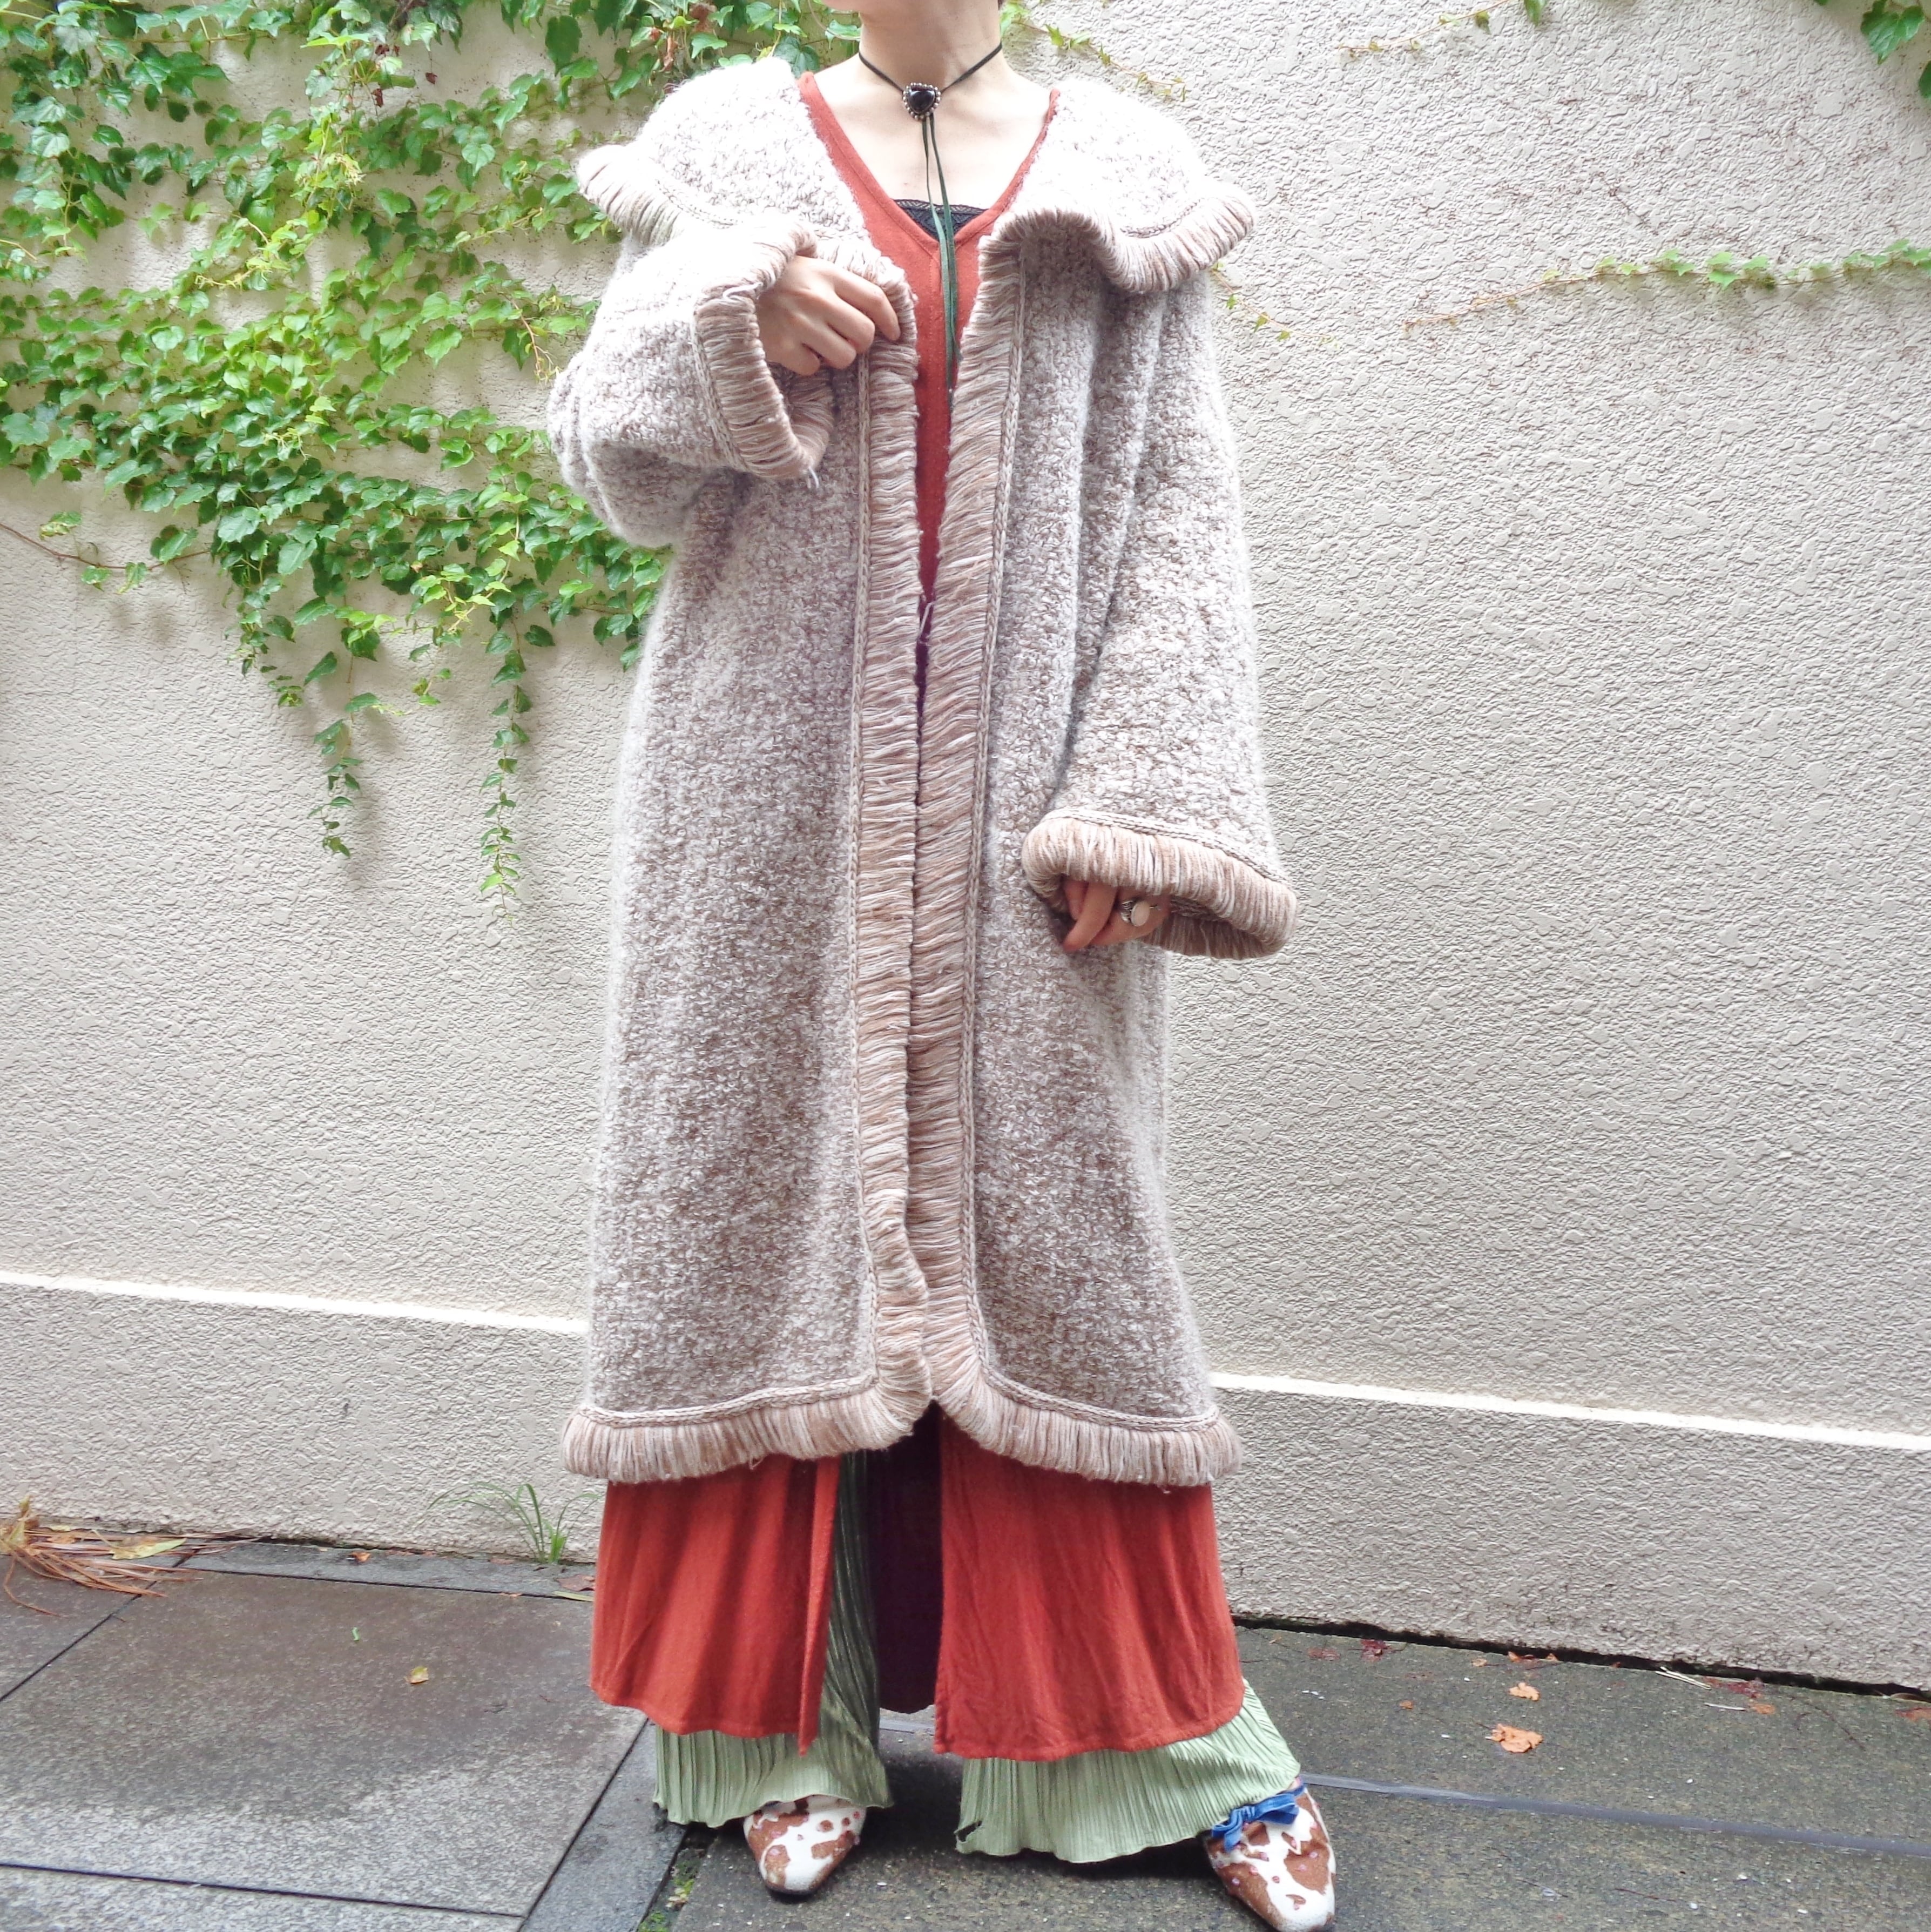 Vintage long knit gown／ヴィンテージ ロング ニット ガウン | BIG TIME ｜ヴィンテージ 古着  BIGTIME（ビッグタイム） powered by BASE